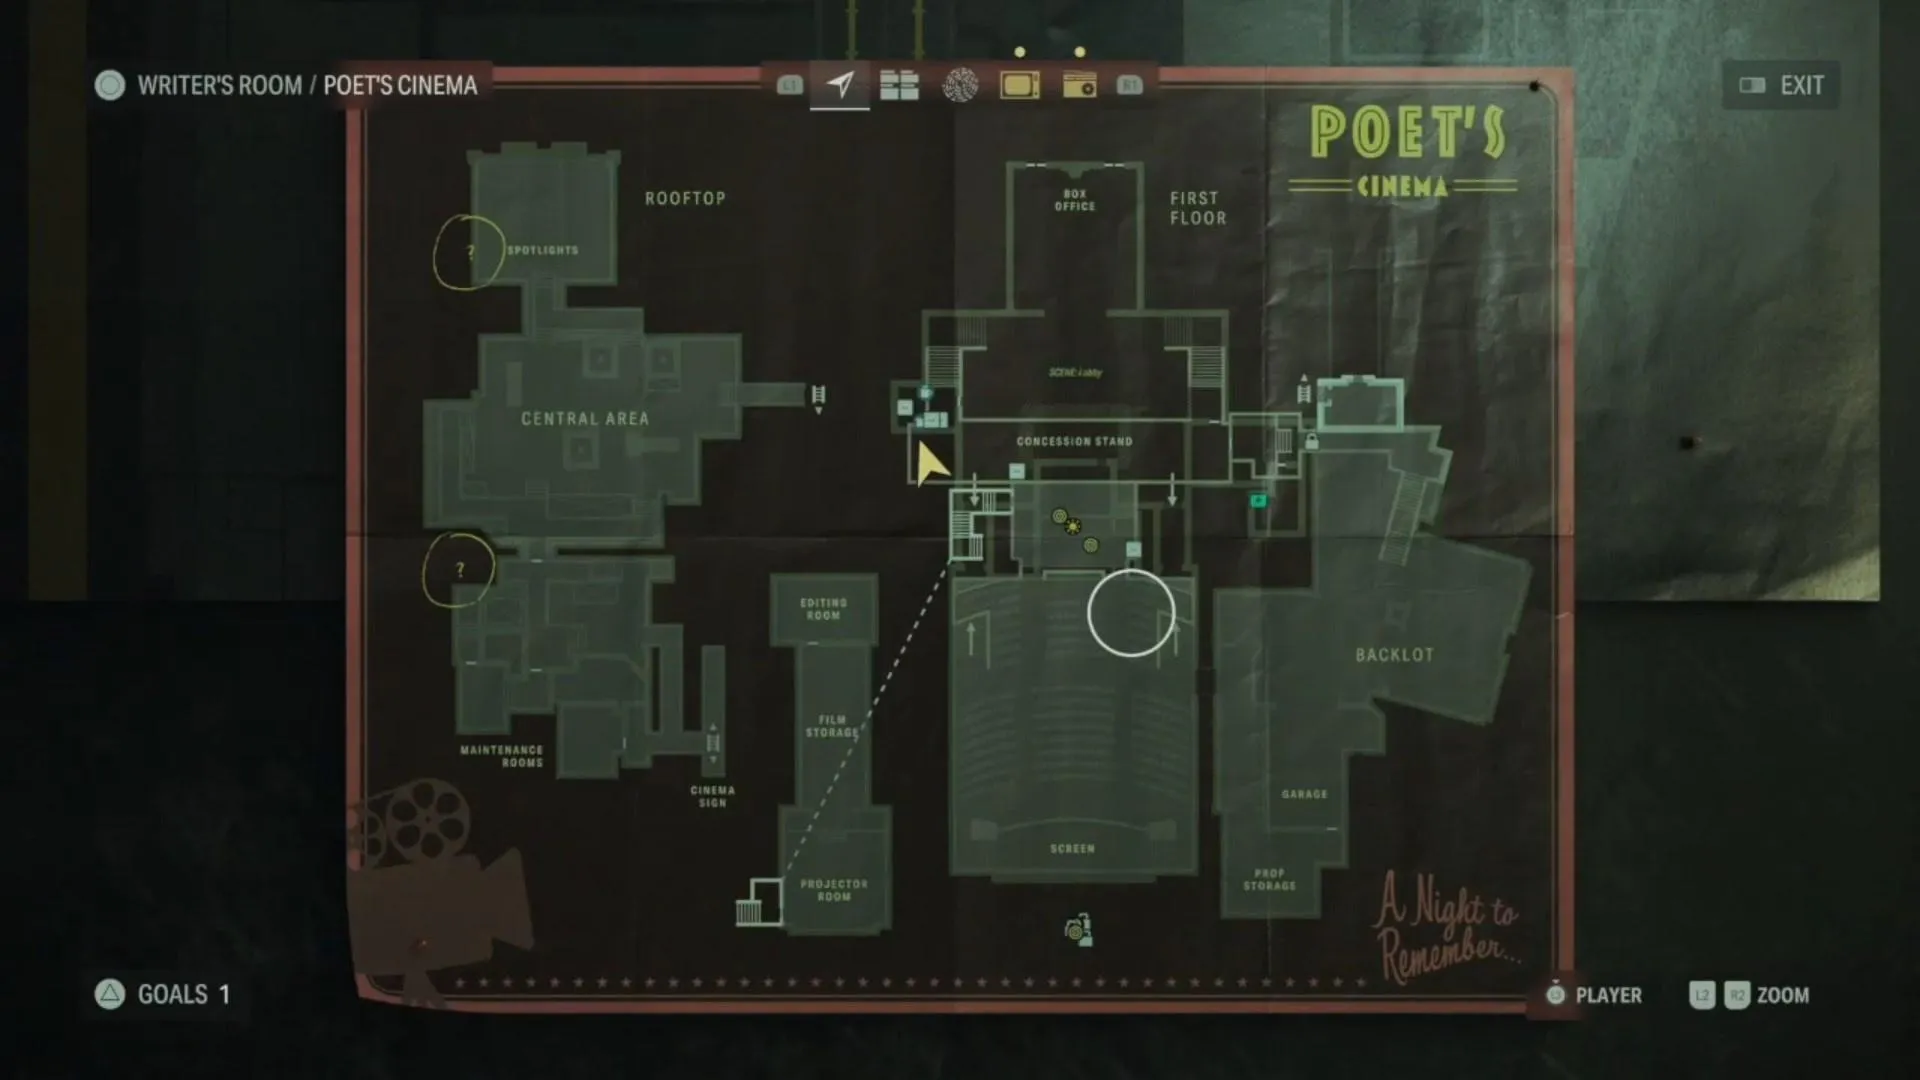 Alan Wake 2 All Words of Power Locations